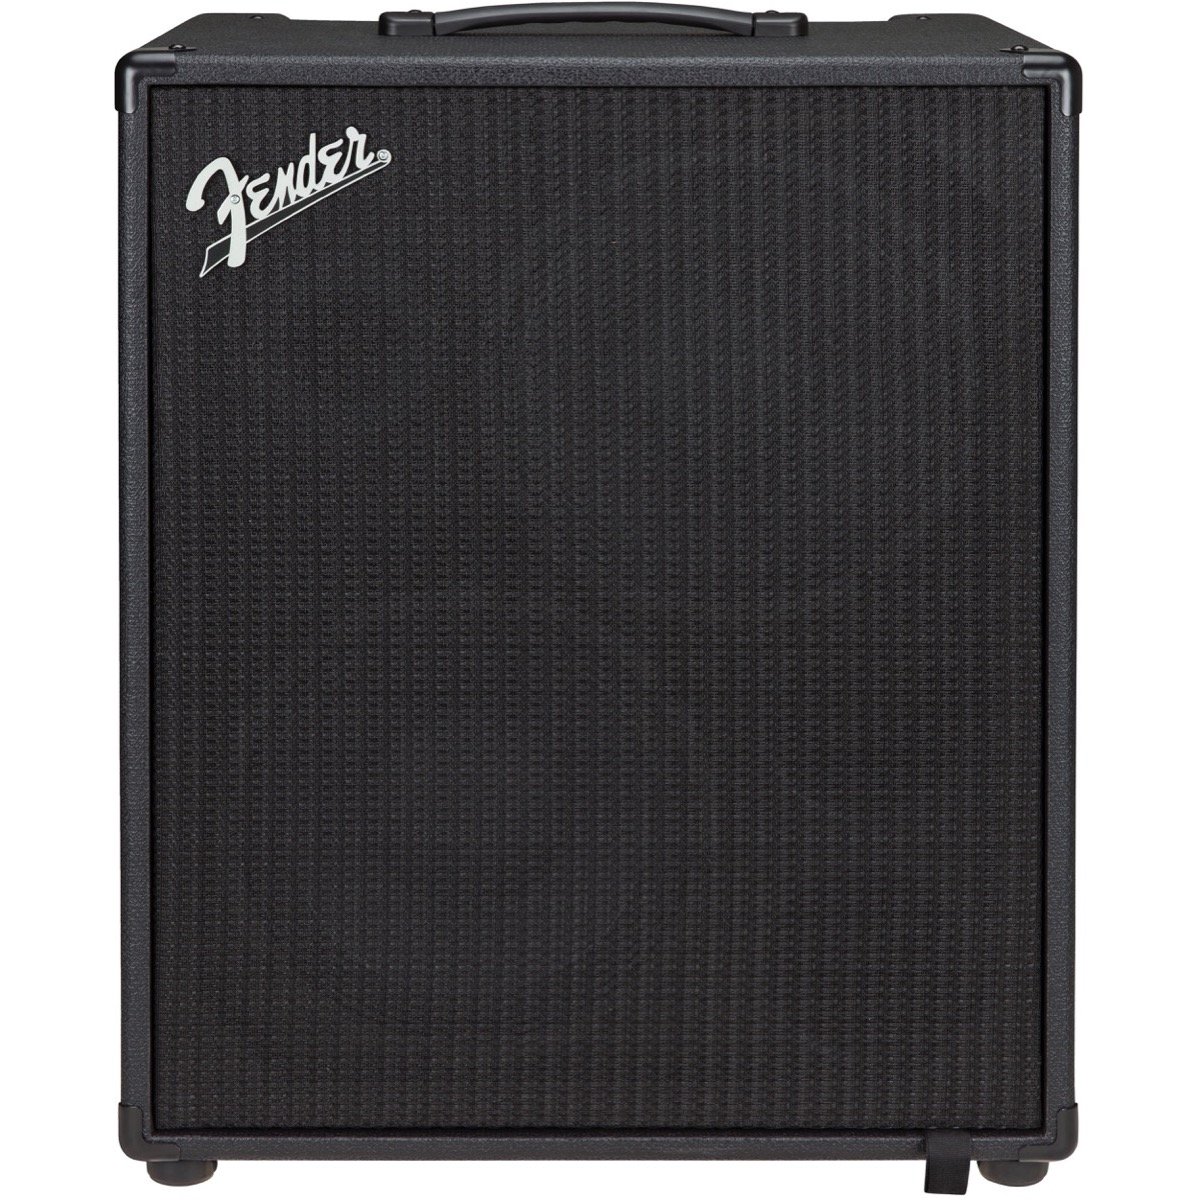 Fender Rumble Stage 800 2x10 WiFi BT Bass Combo -  2376100000